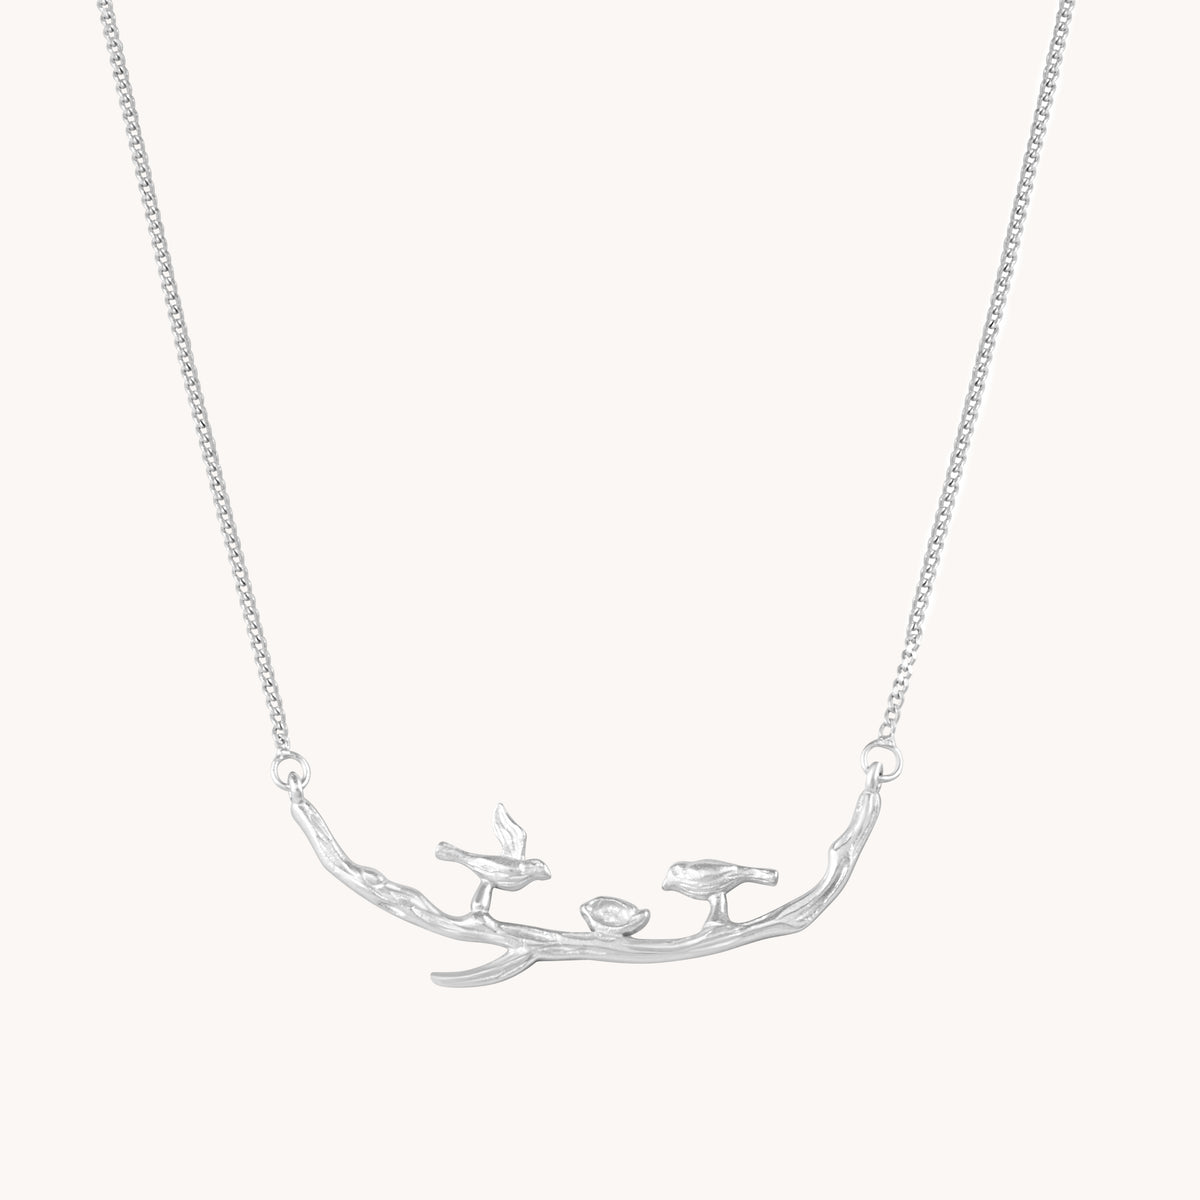 Birds And Nest Silver Necklace